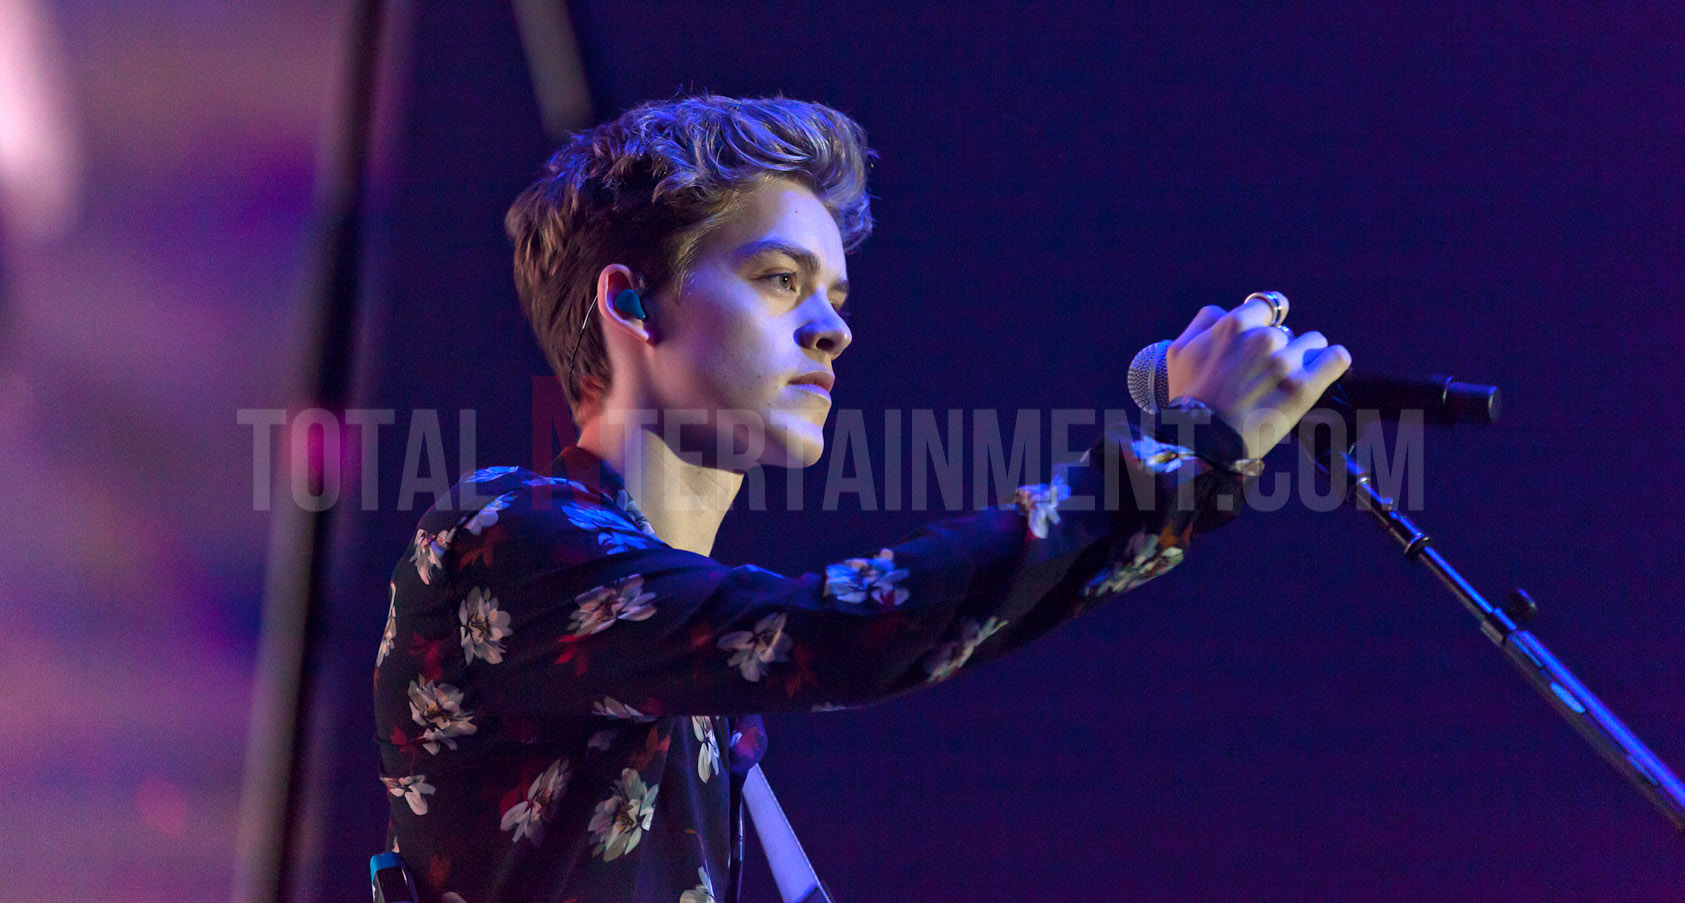 New Hope Club, The Vamps, Sheffield, Support, Special guest, Jo Forrest, totalntertainment